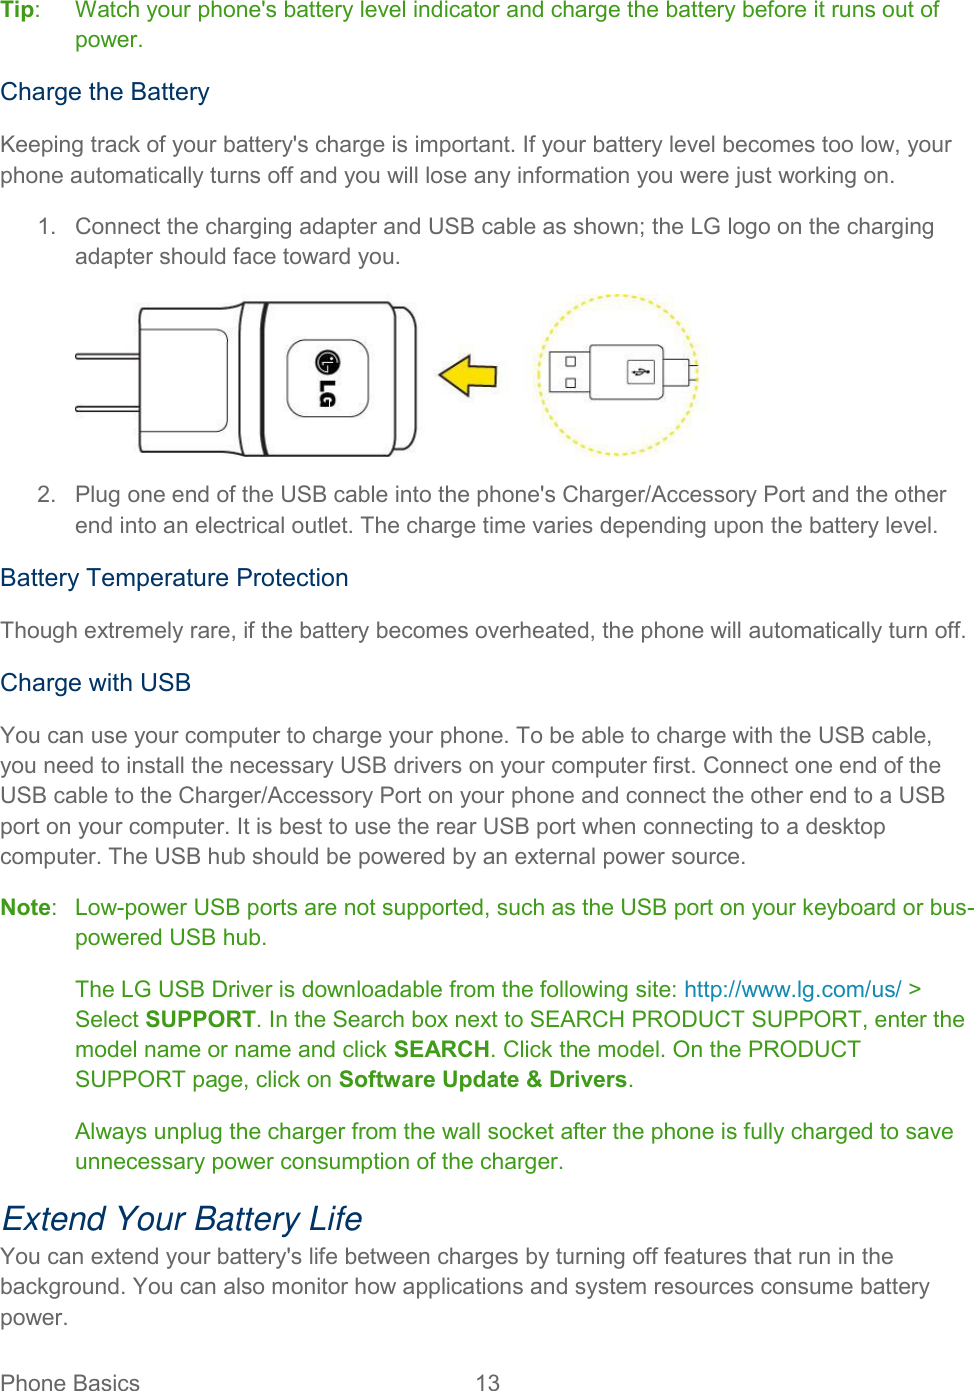  Phone Basics  13   Tip:   Watch your phone&apos;s battery level indicator and charge the battery before it runs out of power. Charge the Battery  Keeping track of your battery&apos;s charge is important. If your battery level becomes too low, your phone automatically turns off and you will lose any information you were just working on.  1.  Connect the charging adapter and USB cable as shown; the LG logo on the charging adapter should face toward you.   2.  Plug one end of the USB cable into the phone&apos;s Charger/Accessory Port and the other end into an electrical outlet. The charge time varies depending upon the battery level.  Battery Temperature Protection Though extremely rare, if the battery becomes overheated, the phone will automatically turn off. Charge with USB You can use your computer to charge your phone. To be able to charge with the USB cable, you need to install the necessary USB drivers on your computer first. Connect one end of the USB cable to the Charger/Accessory Port on your phone and connect the other end to a USB port on your computer. It is best to use the rear USB port when connecting to a desktop computer. The USB hub should be powered by an external power source. Note:  Low-power USB ports are not supported, such as the USB port on your keyboard or bus-powered USB hub. The LG USB Driver is downloadable from the following site: http://www.lg.com/us/ &gt; Select SUPPORT. In the Search box next to SEARCH PRODUCT SUPPORT, enter the model name or name and click SEARCH. Click the model. On the PRODUCT SUPPORT page, click on Software Update &amp; Drivers. Always unplug the charger from the wall socket after the phone is fully charged to save unnecessary power consumption of the charger. Extend Your Battery Life You can extend your battery&apos;s life between charges by turning off features that run in the background. You can also monitor how applications and system resources consume battery power. 